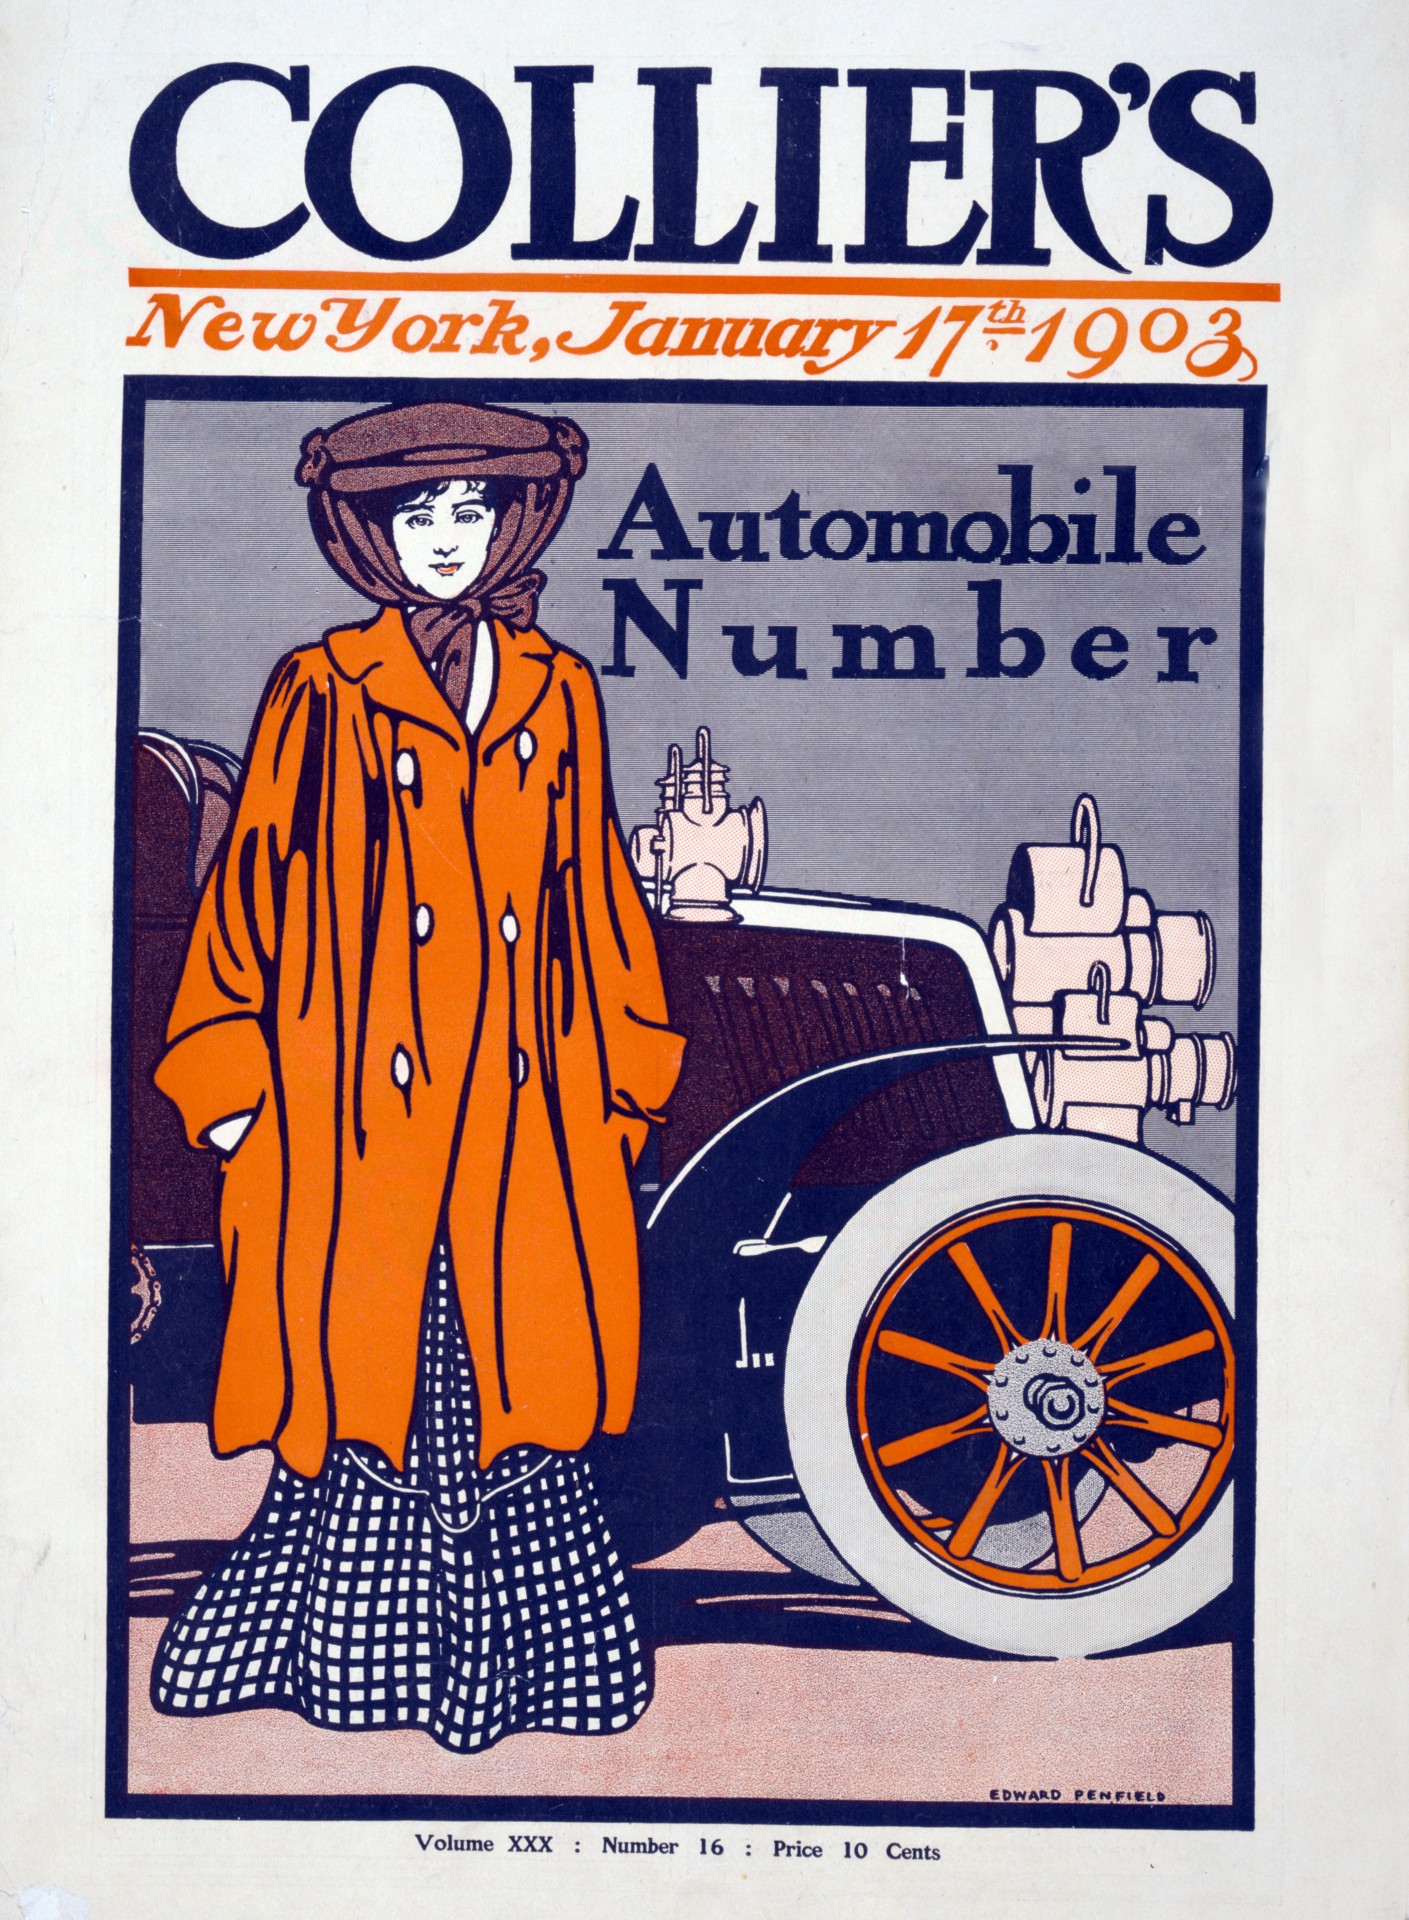 Public domain 1903 vintage illustration of a woman and car on front page of Colliers Magazine